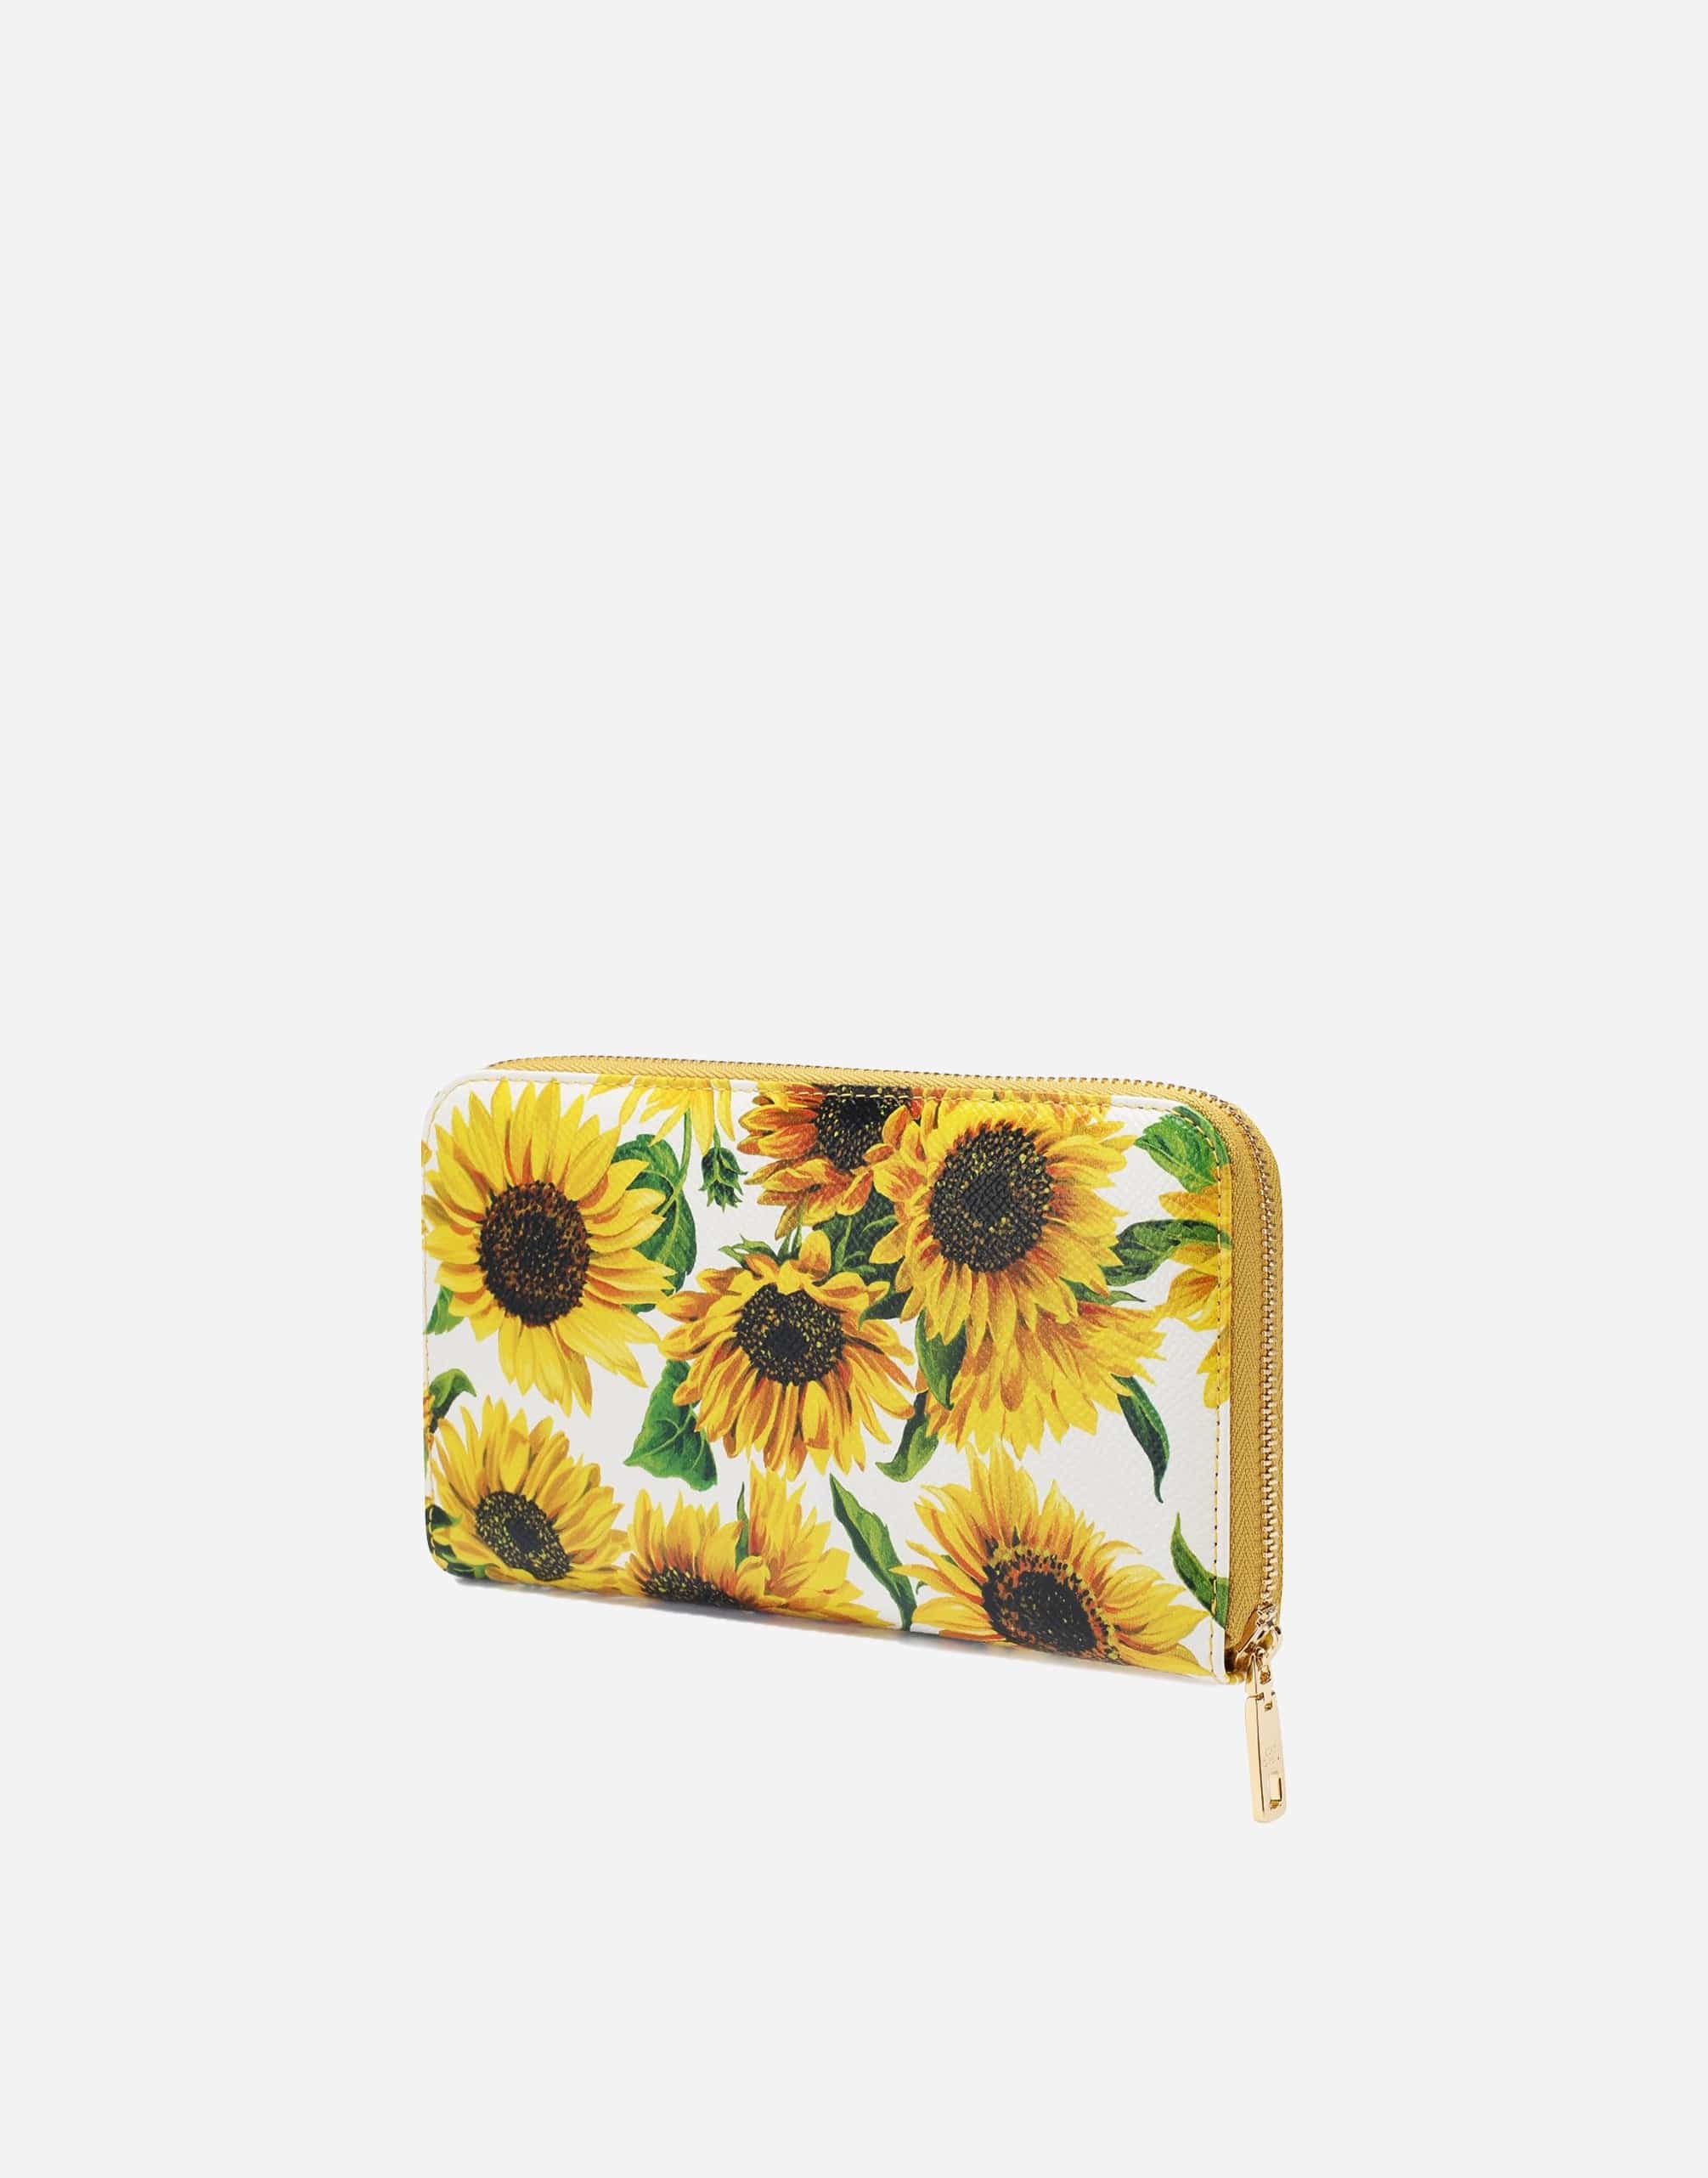 Sunflower-Print Leather Wallet